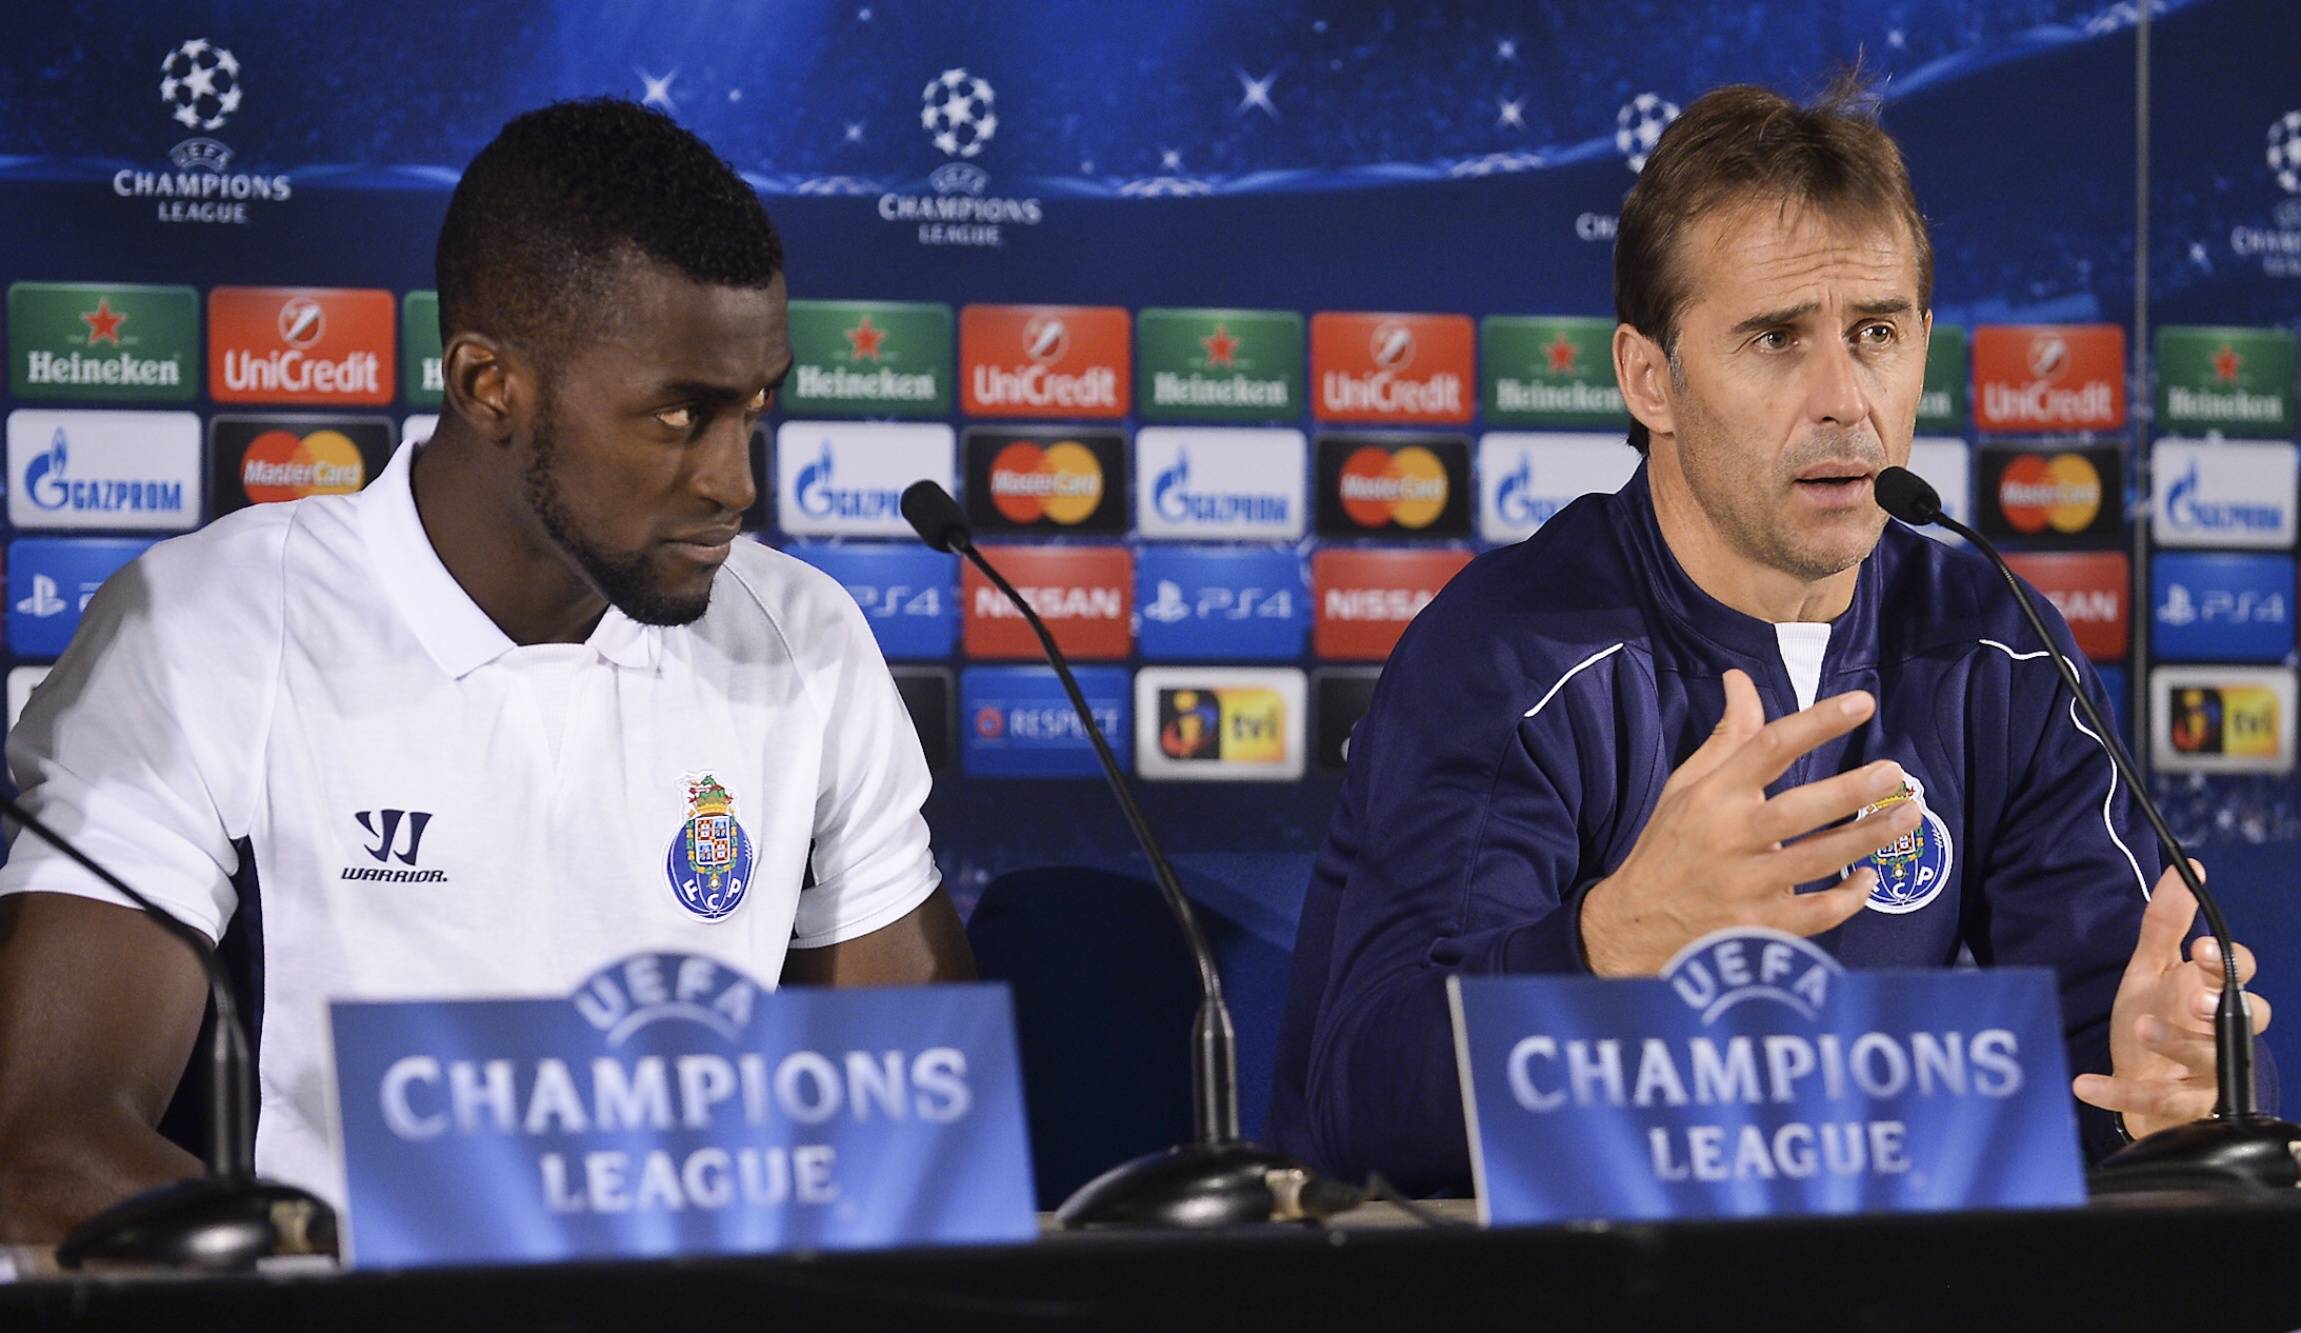 Press conference of FC Porto 10/20/2014 - Press conference of FC Porto held this morning in the auditorium of the Dragon Stadium, preview the Champions League game against Athletic Bilbao. Jackson Martinez; Lopetegui (Fabio Well / Global Images) PUBLICATIONxINxGERxSUIxAUTxHUNxONLY xFabioxPo��ox Press Conference of FC Porto 10 20 2014 Press Conference of FC Porto Hero This Morning in The Auditorium of The Dragon Stage Preview The Champions League Game Against Athletic Bilbao Jackson Martinez Lopetegui Fabio Well Global Images PUBLICATIONxINxGERxSUIxAUTxHUNxONLY